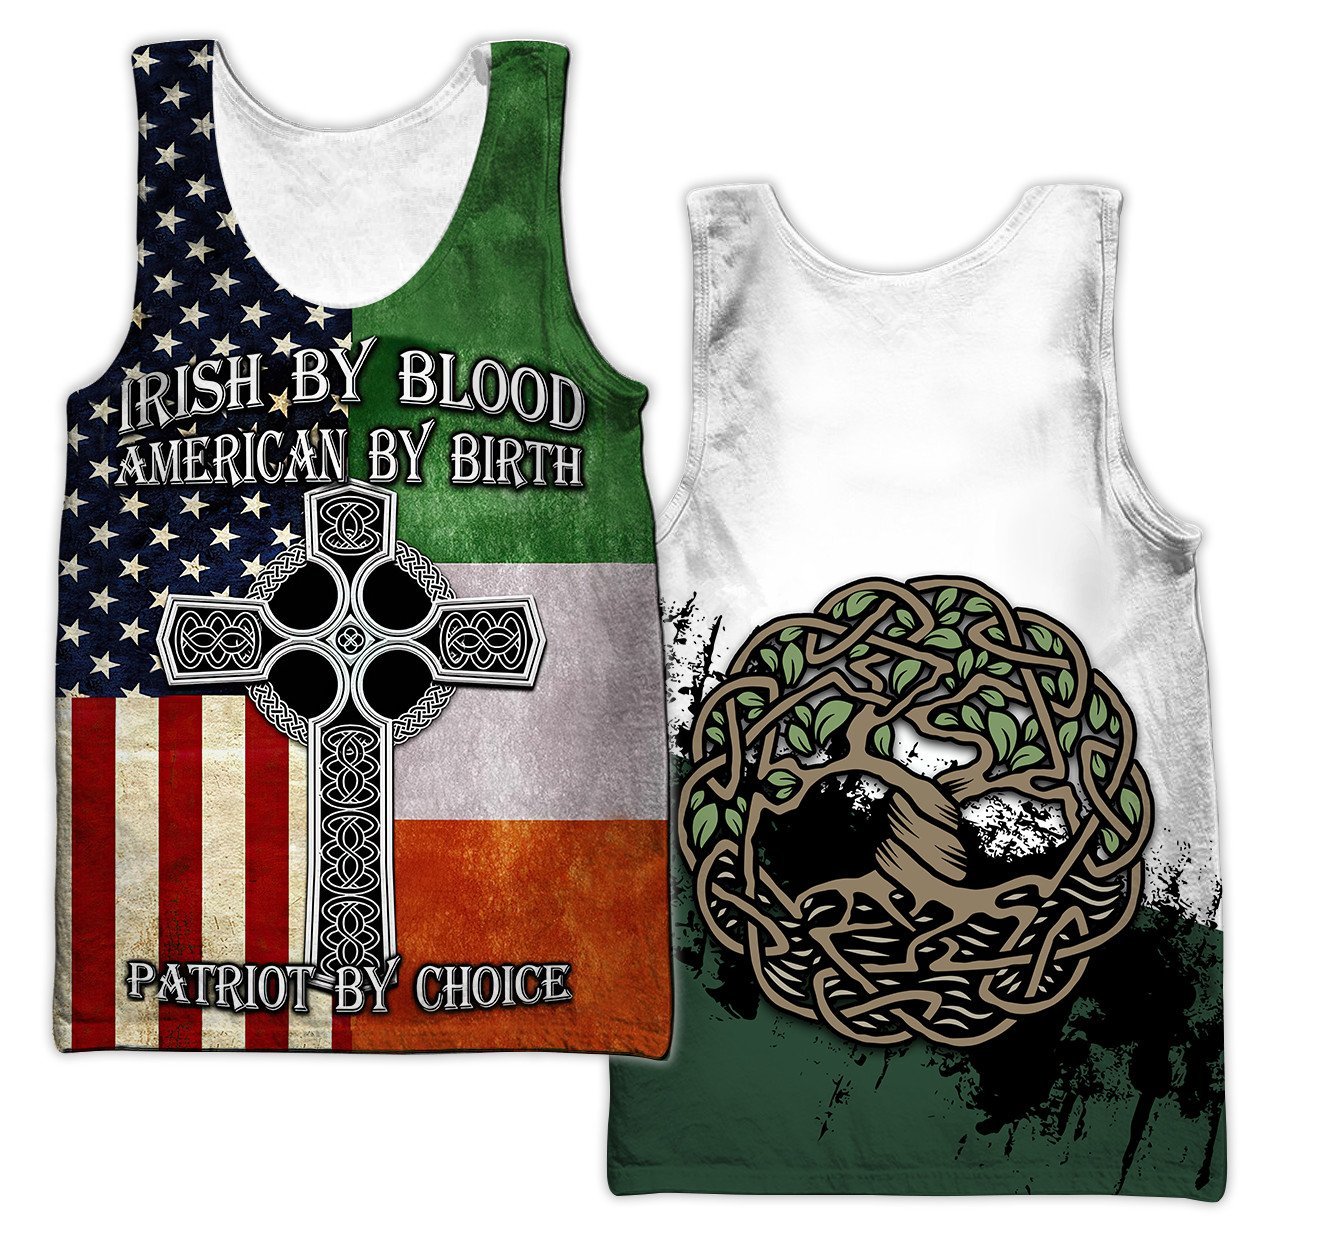 irish by blood american by birth patriot by choice full printing tank top